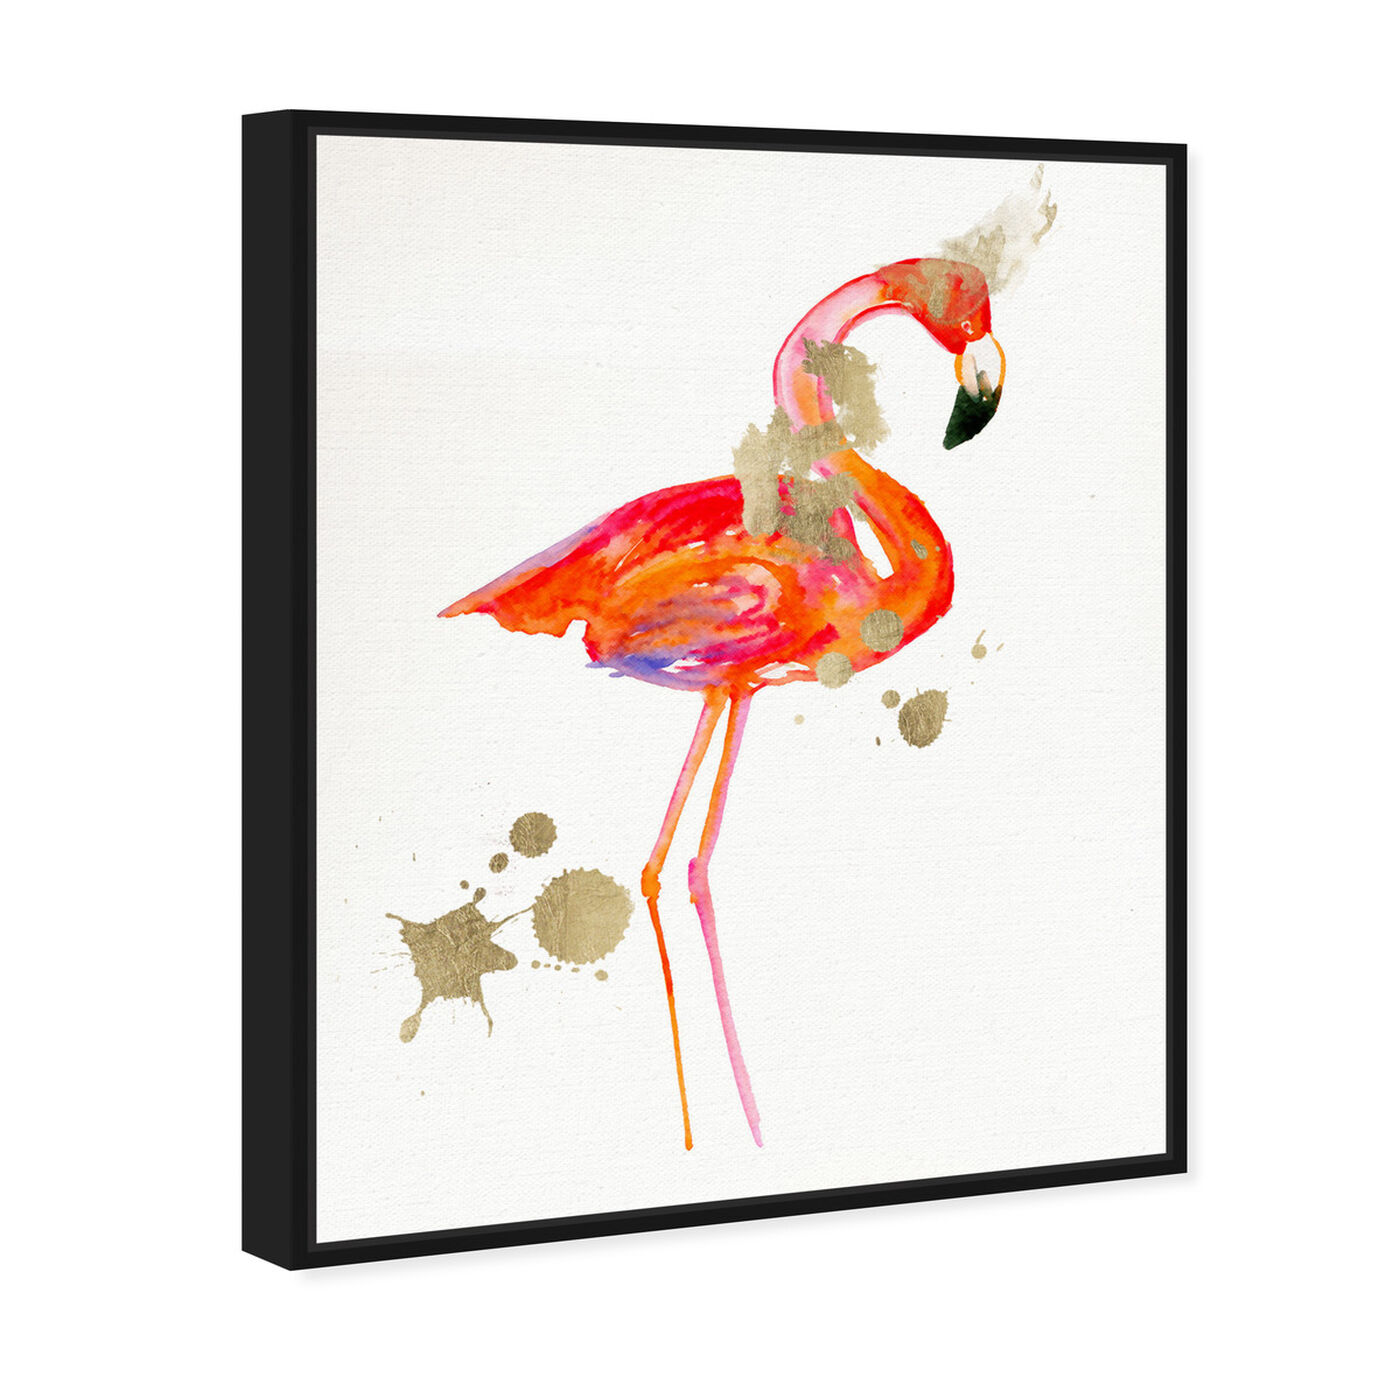 Angled view of Ballerina Flamingo featuring animals and birds art.